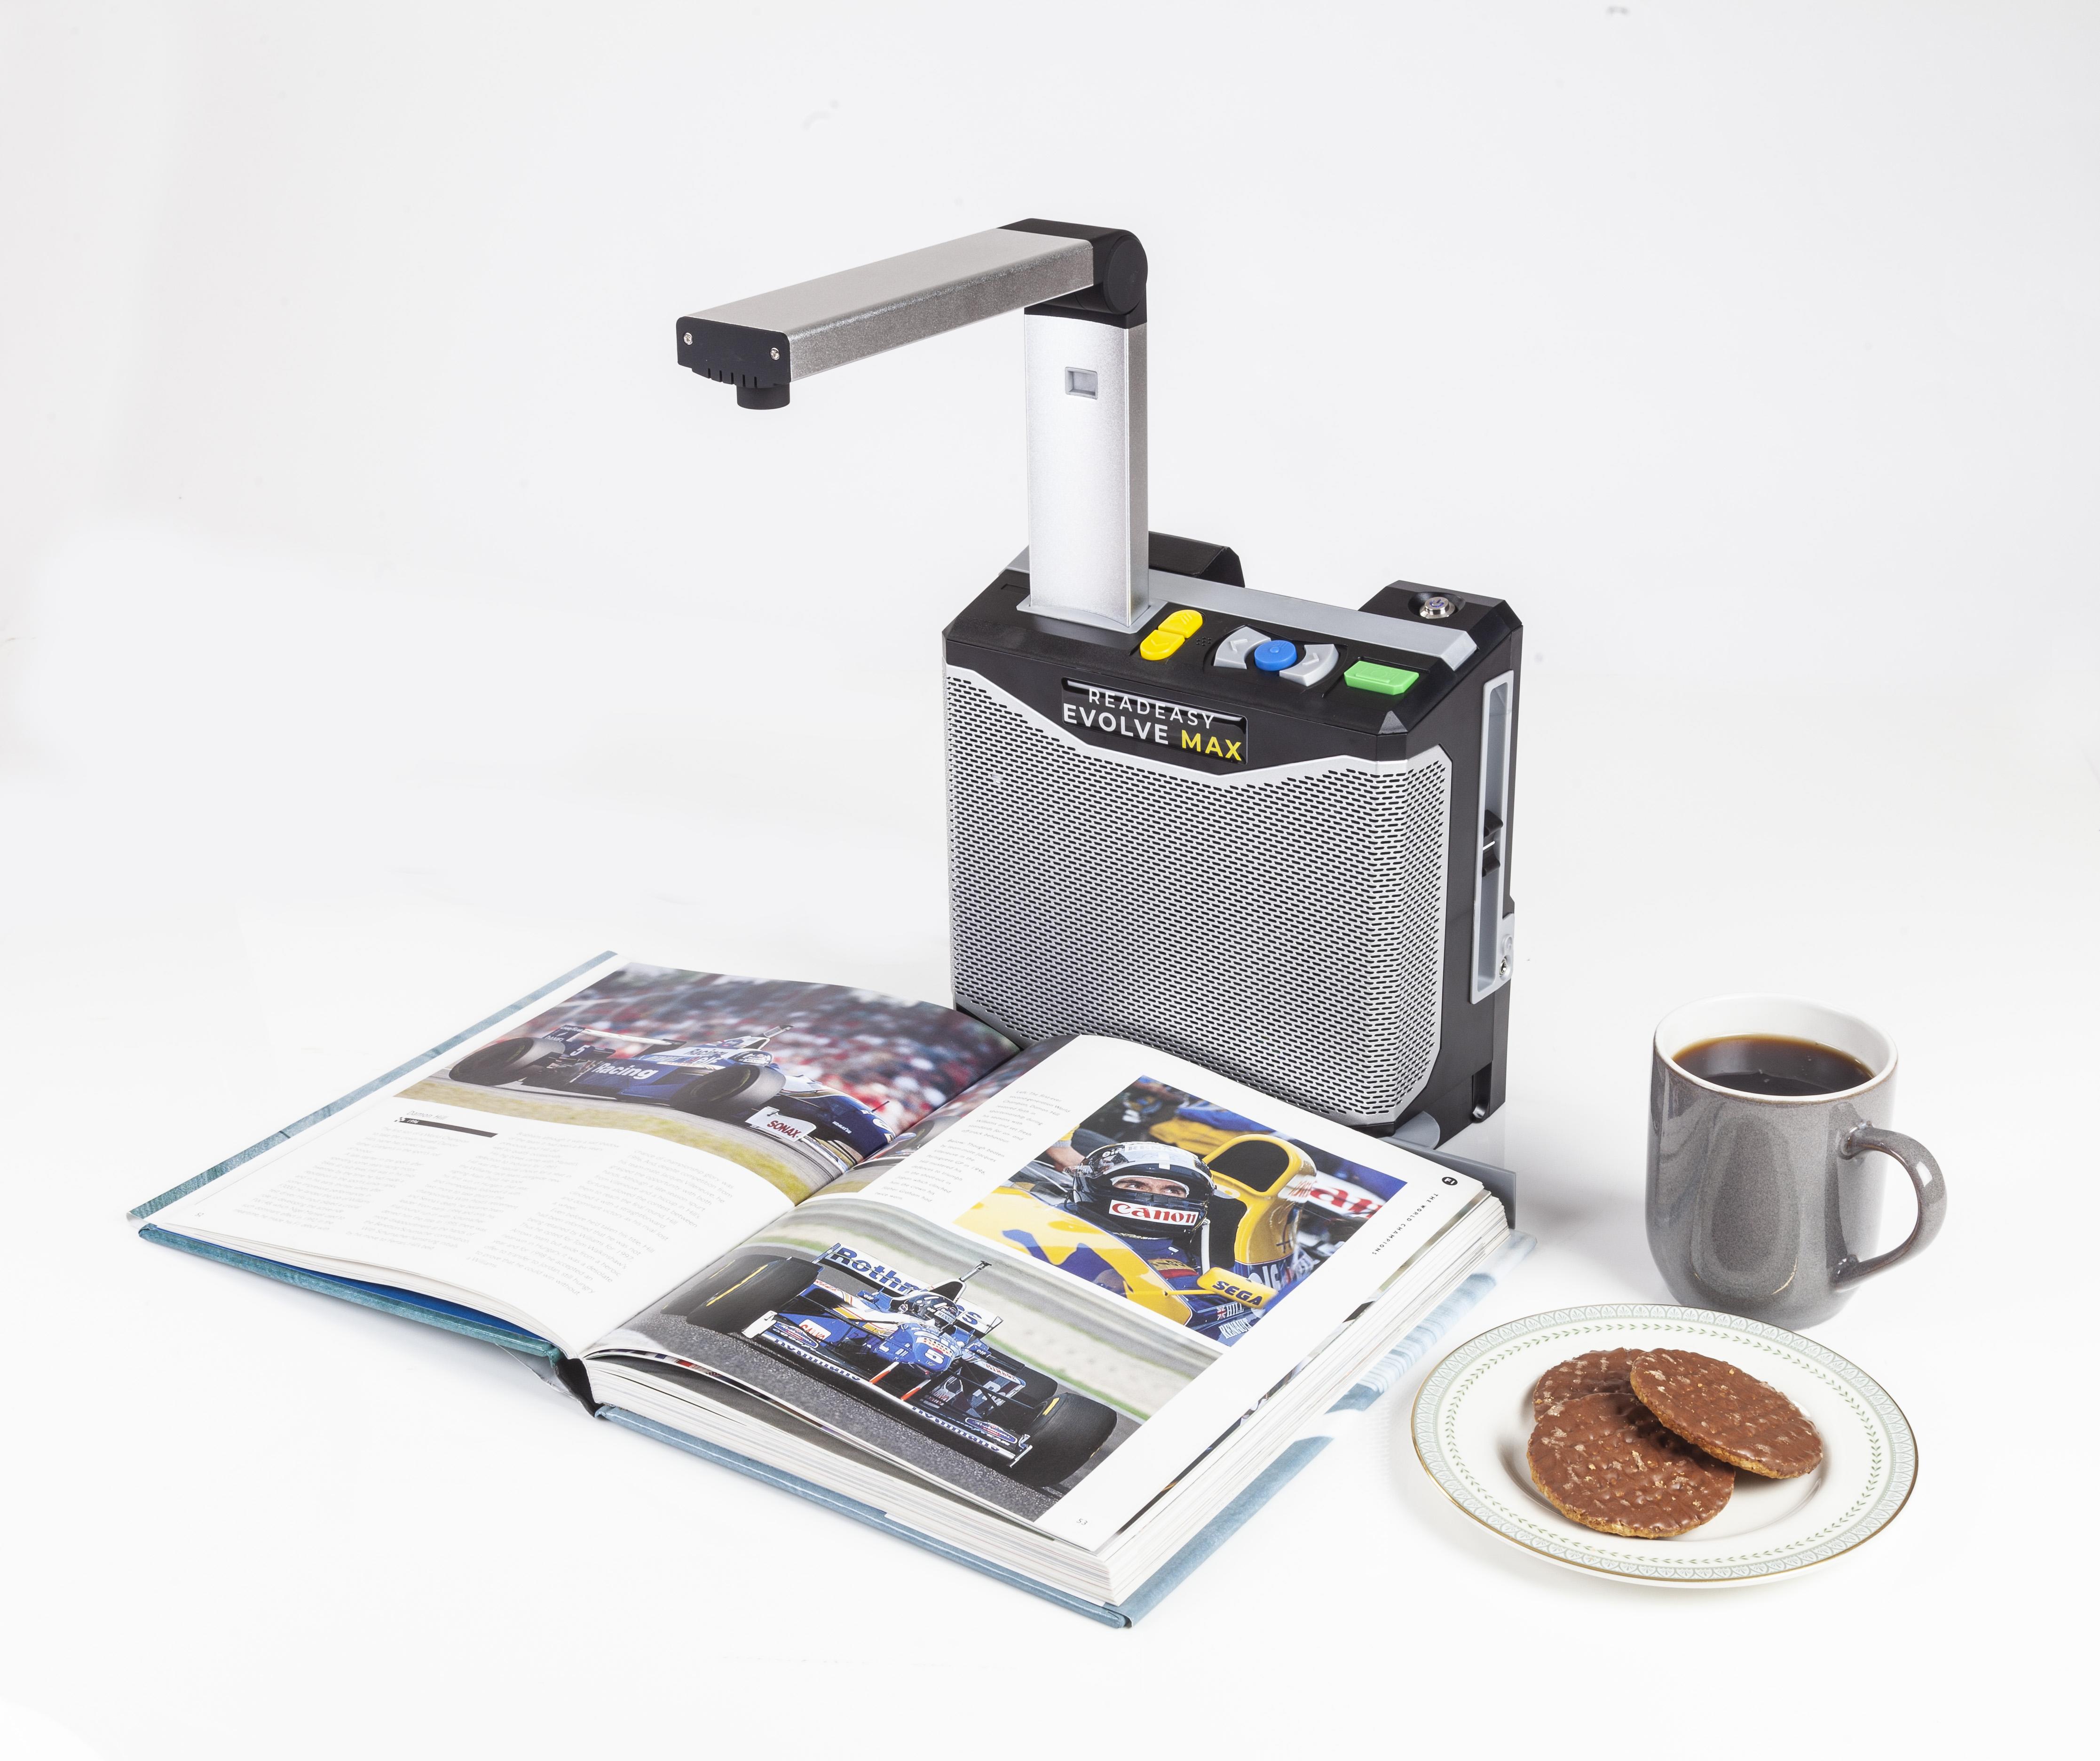 ReadEasy Evolve MAX capturing a page from a Formula 1 book to the right side of the image there is a grey mug filled with black coffee and a place with 3 chocolate covered digestive biscuits